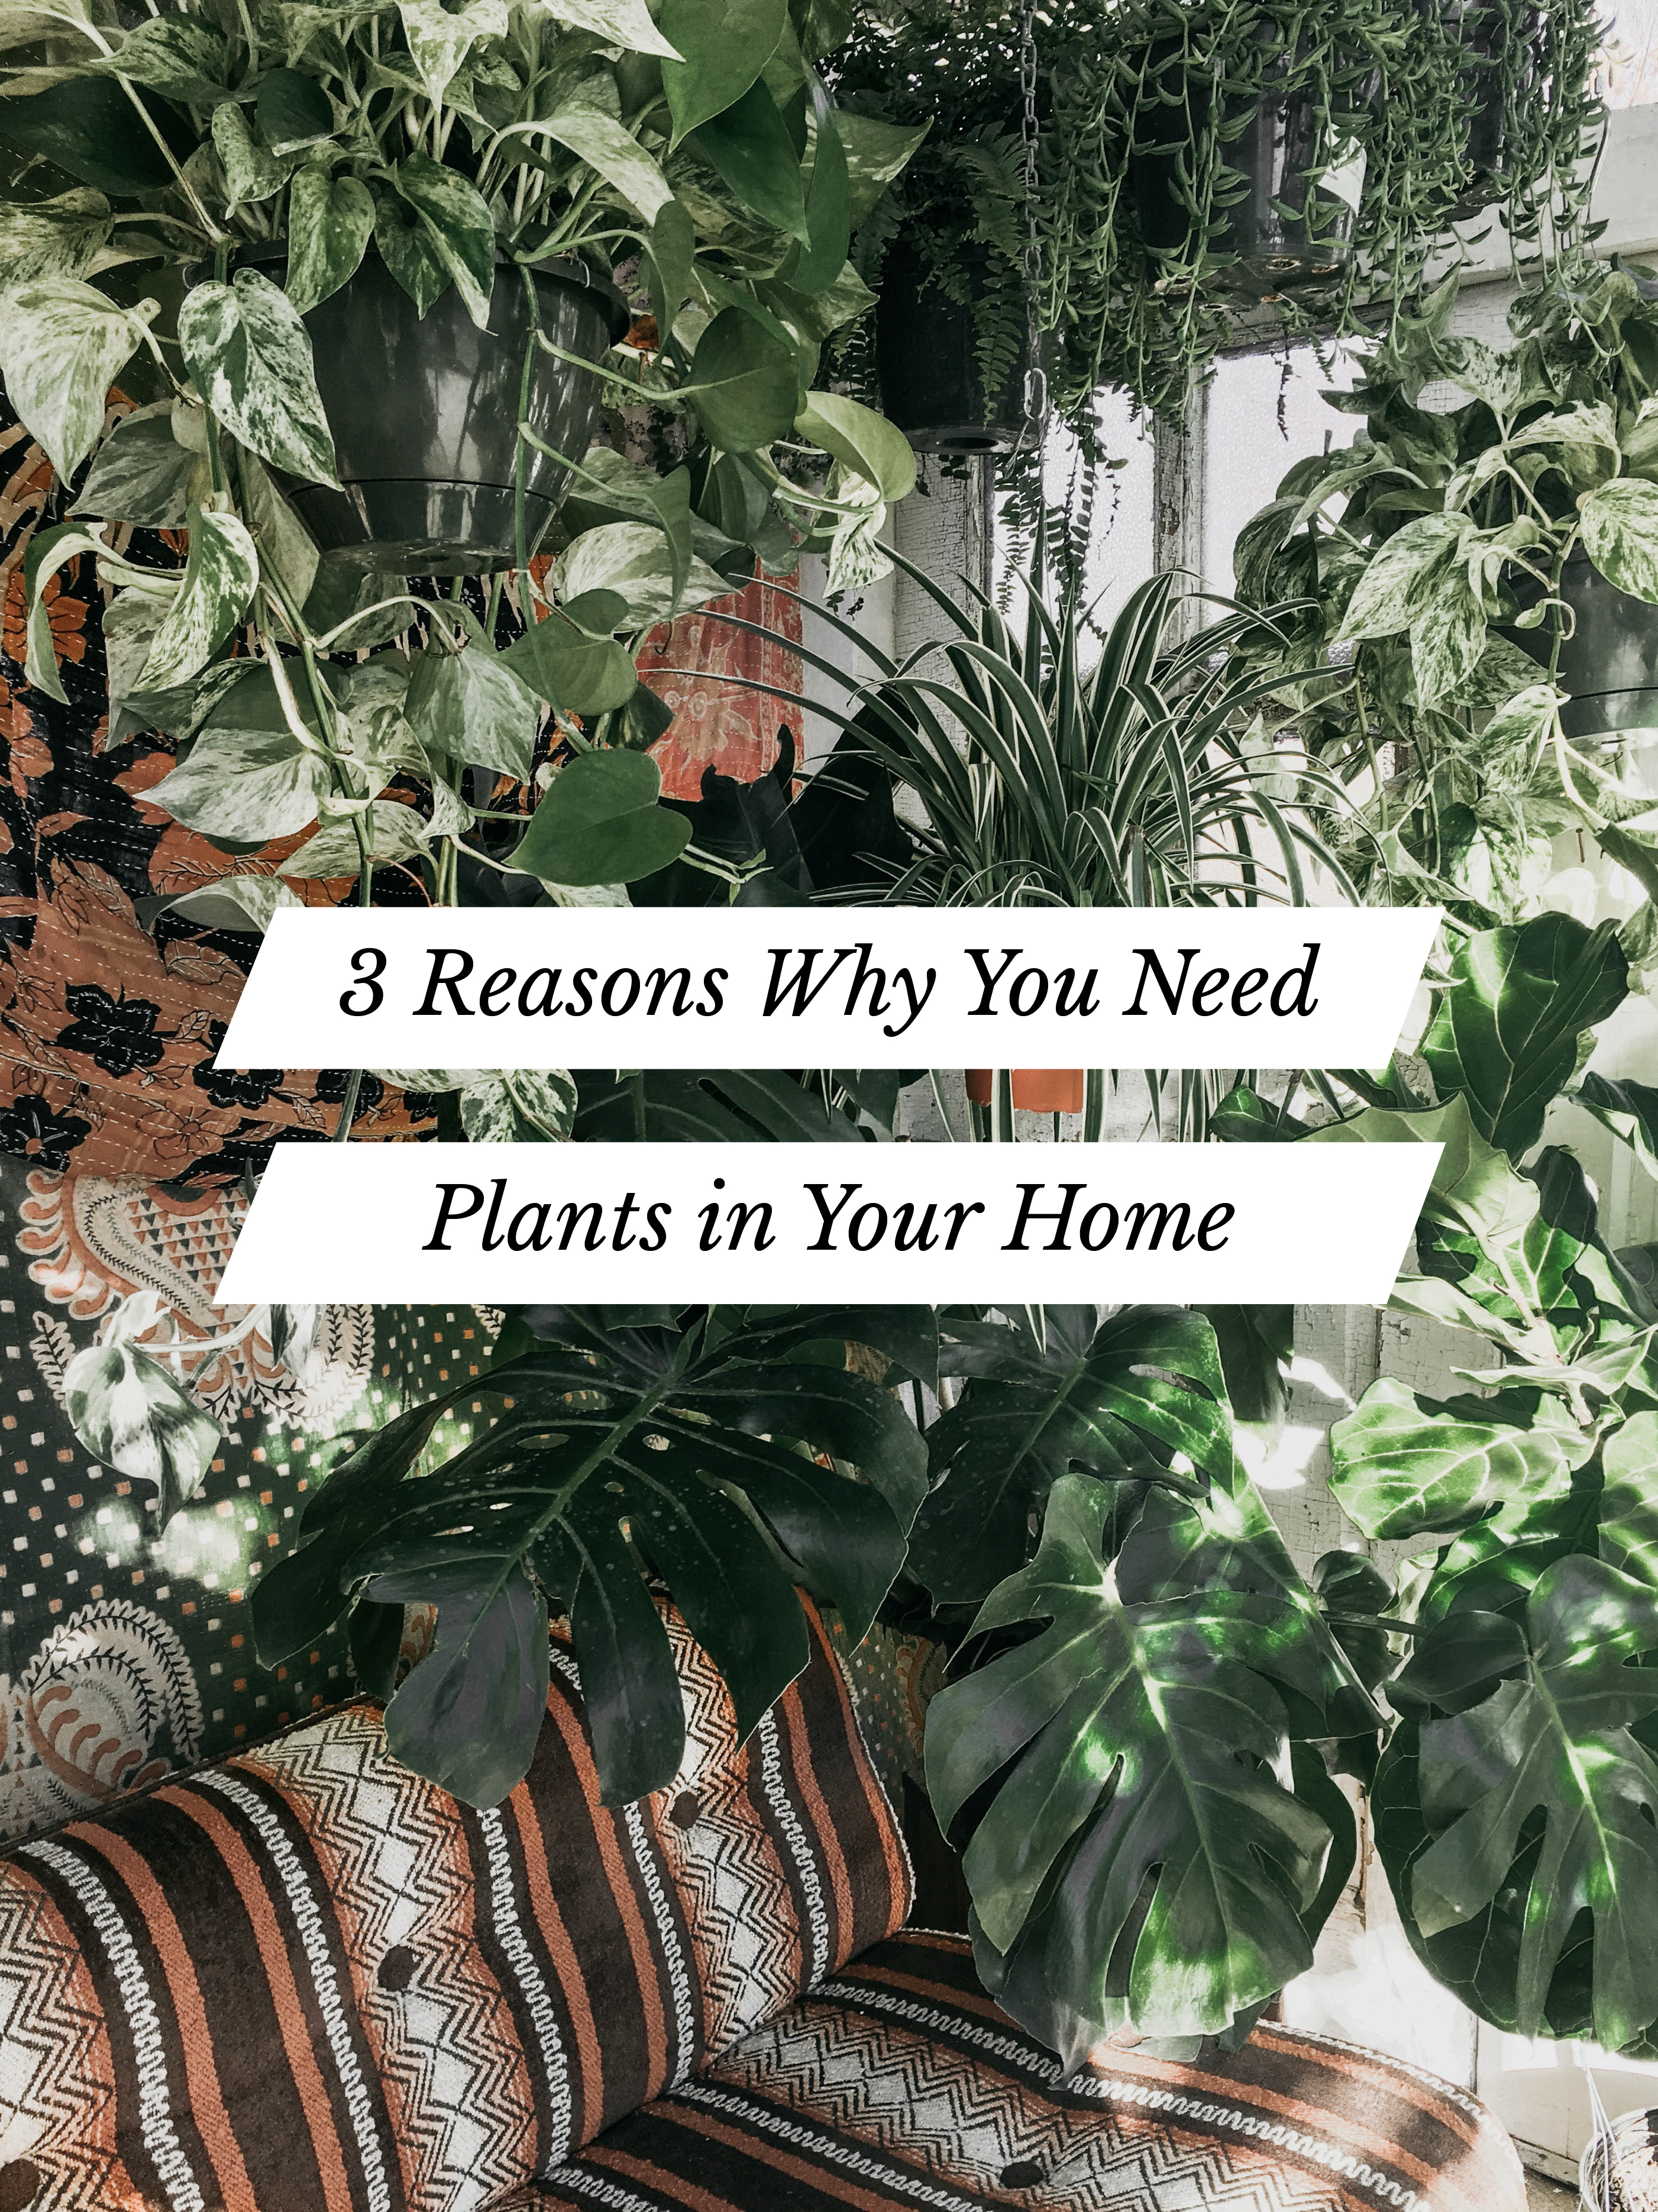 The best way to bring the outdoors in? Houseplants, of course. Indoor plants will purify your air, add beauty to your home, and reduce your stress levels. Plants make people happy. Read more about the three reasons why your home should have plants, and you'll be on your way to becoming a plant lady! / theanastasiaco.com / @theanastasiaco #plants #indoorplants #houseplants